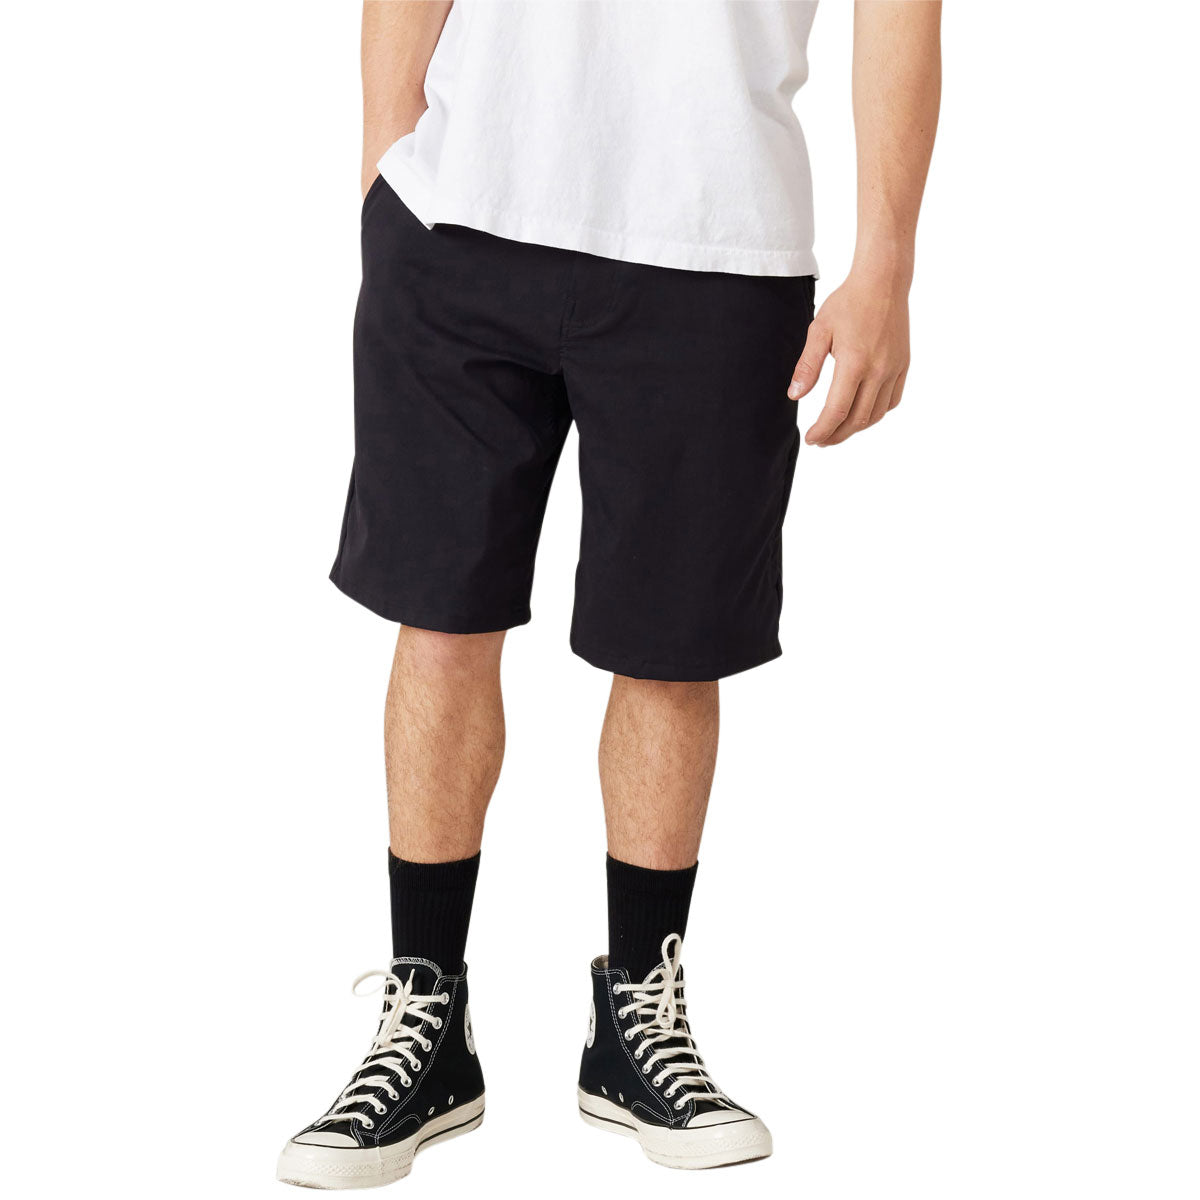 686 Everywhere Hybrid Relaxed Fit Shorts - Black image 2